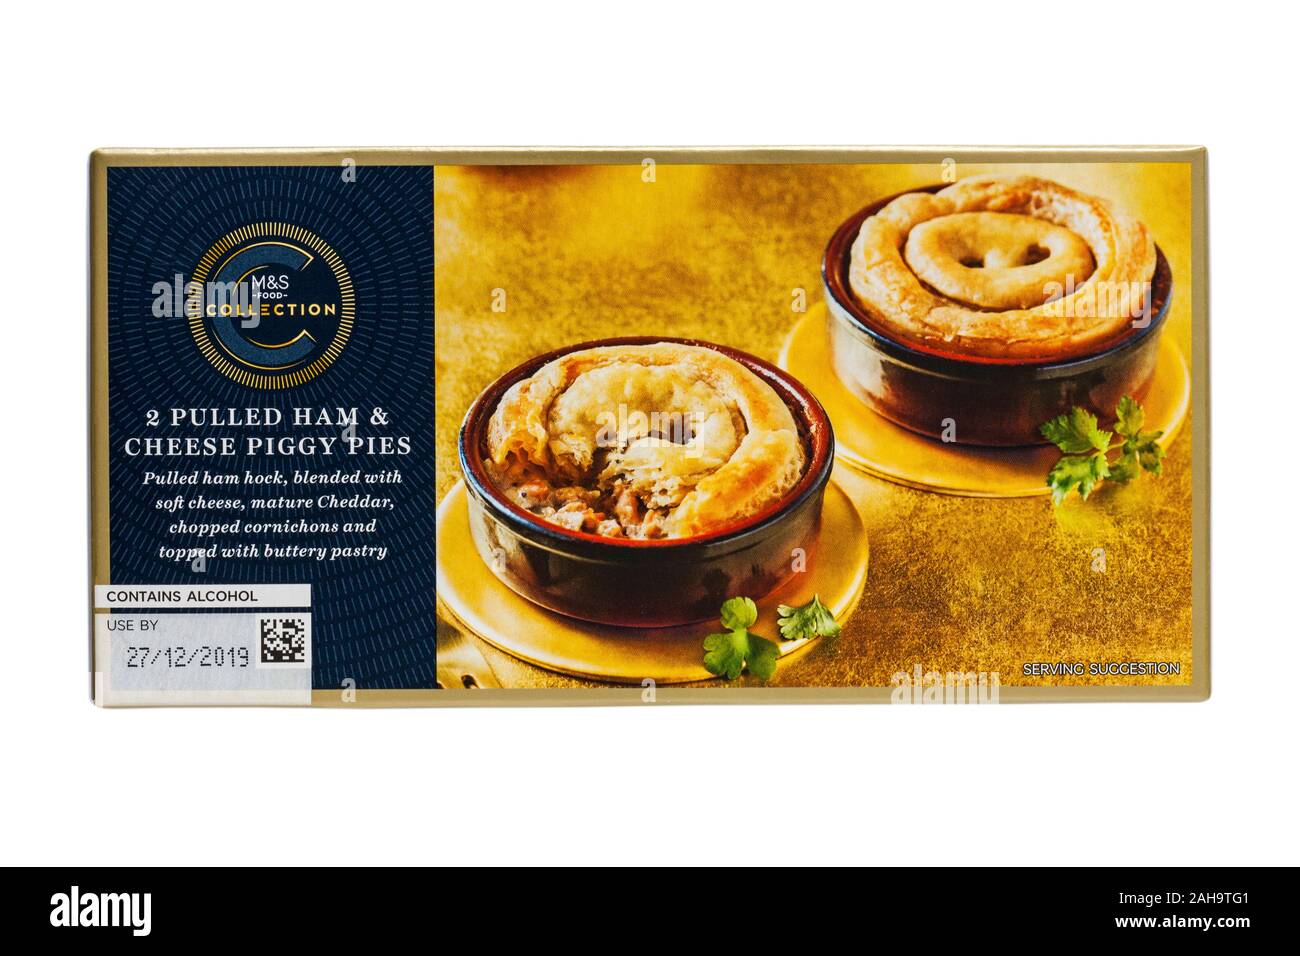 2 pulled ham & cheese piggy pies from M&S food collection isolated on white background Stock Photo